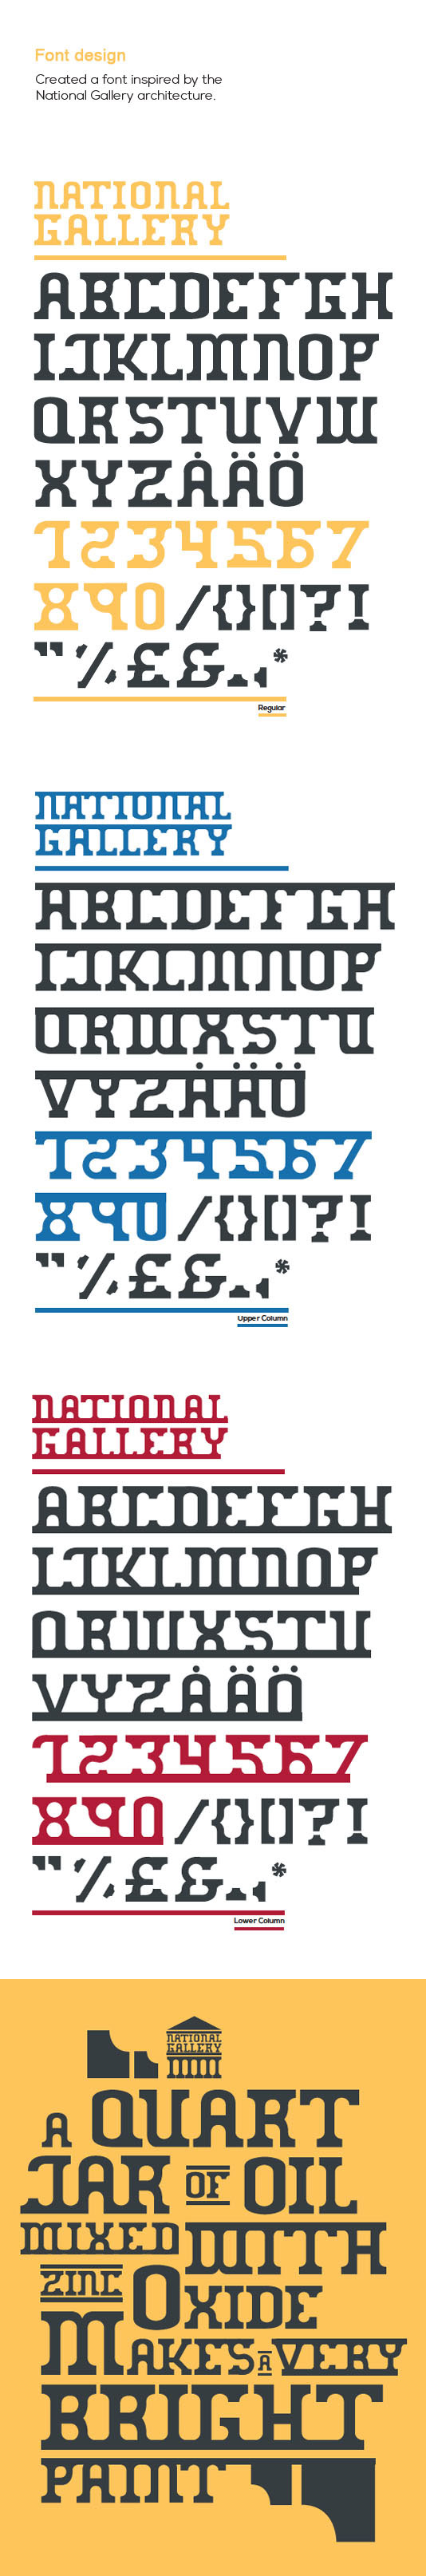 font Display type National Gallery column serif capitals uppercase letter alphabet